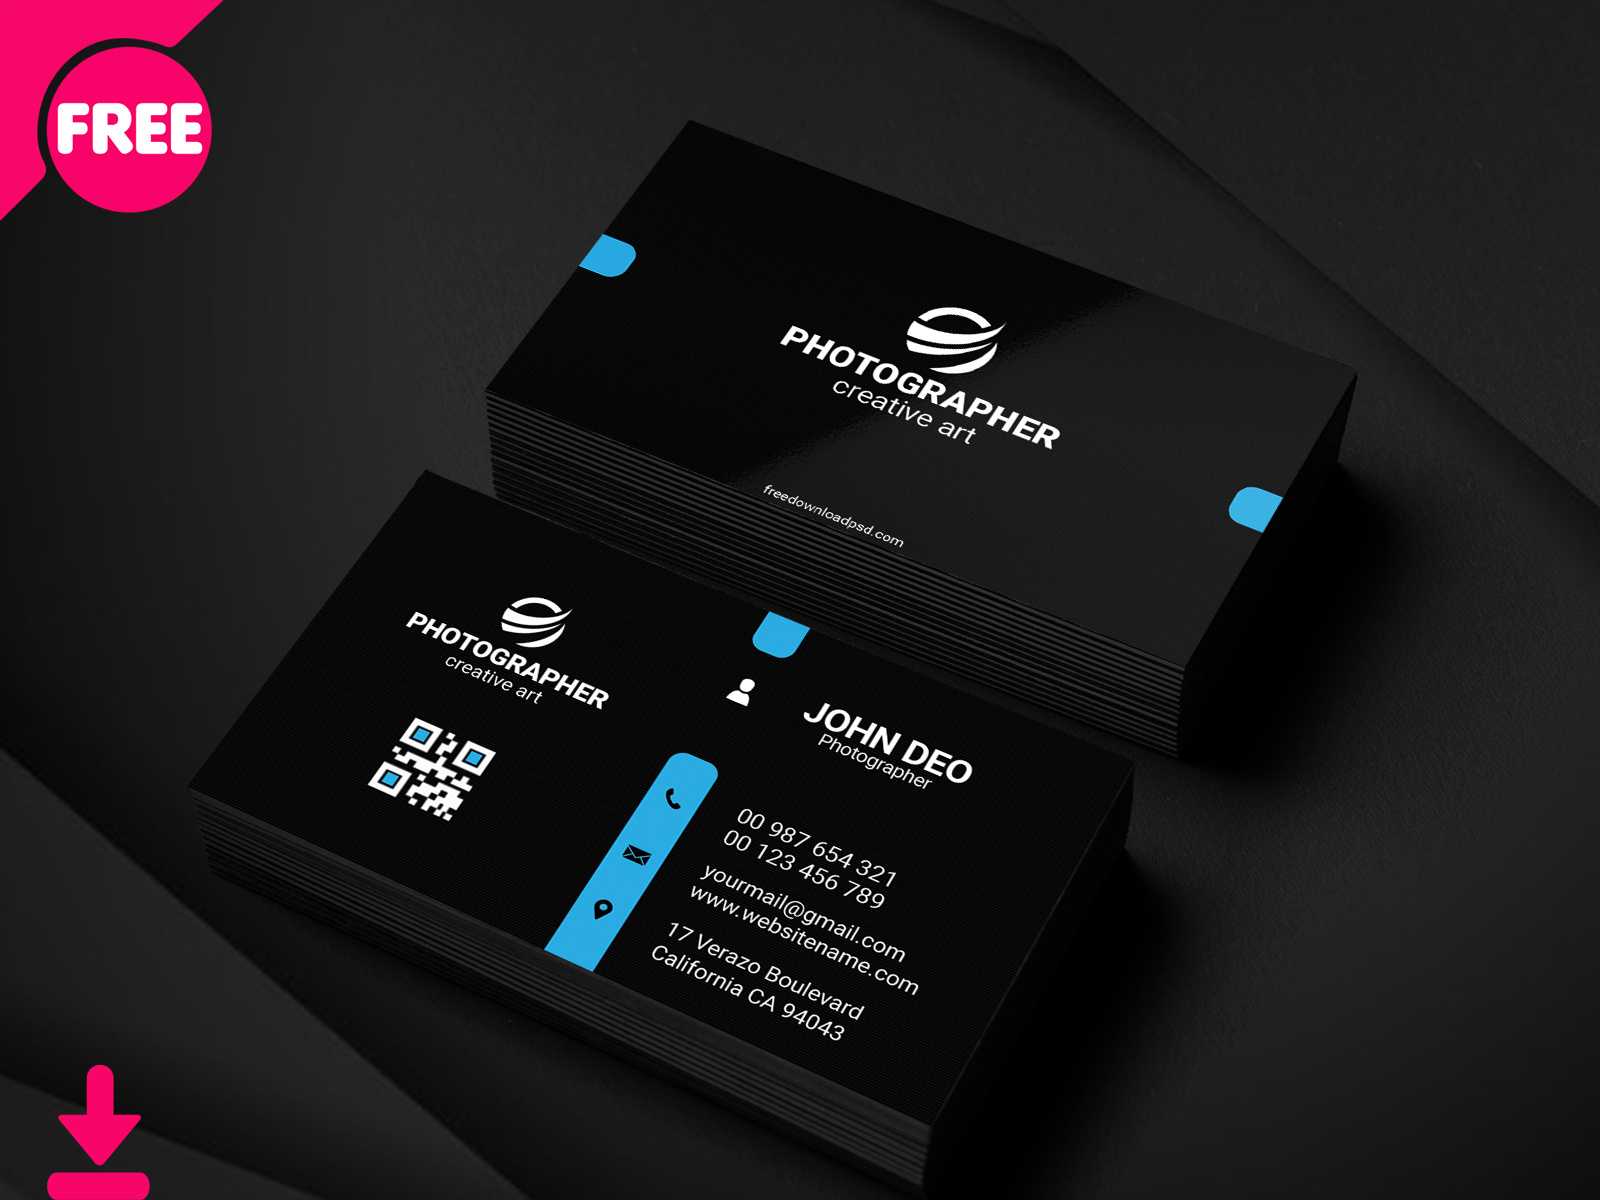 Free Personal Business Card Psd Template Coversheikh Regarding Free Personal Business Card Templates